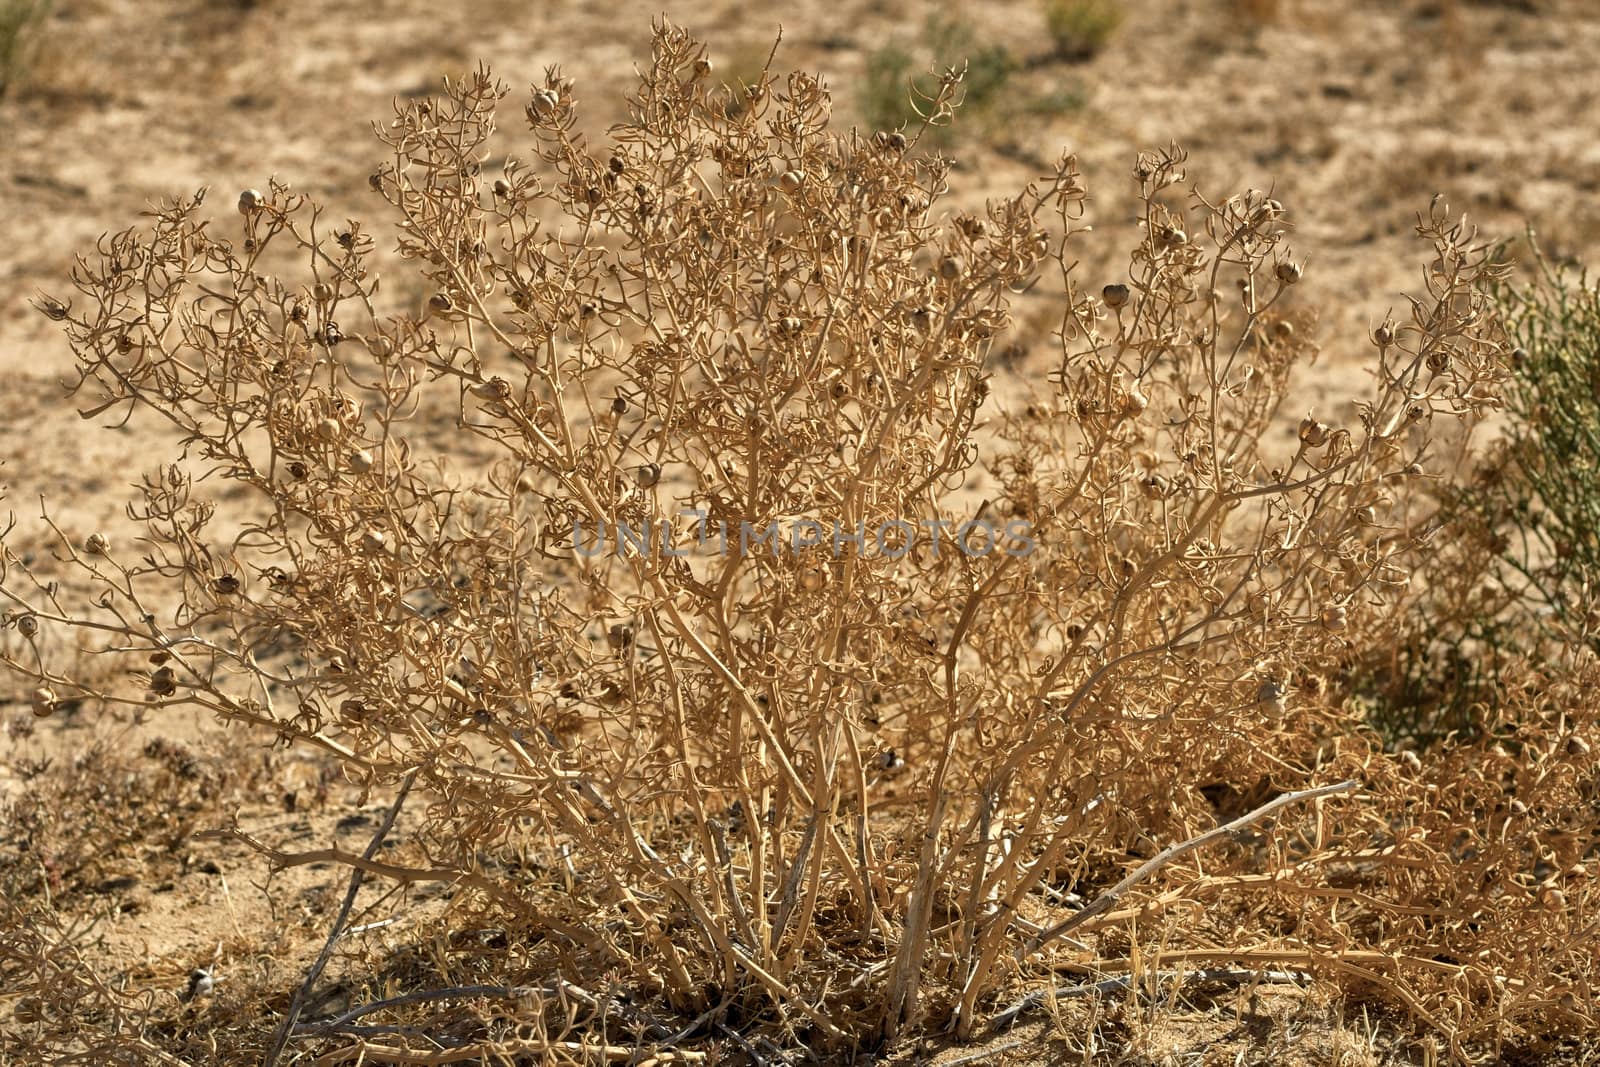 Garmaly ordinary grass, dry the seeds in October.